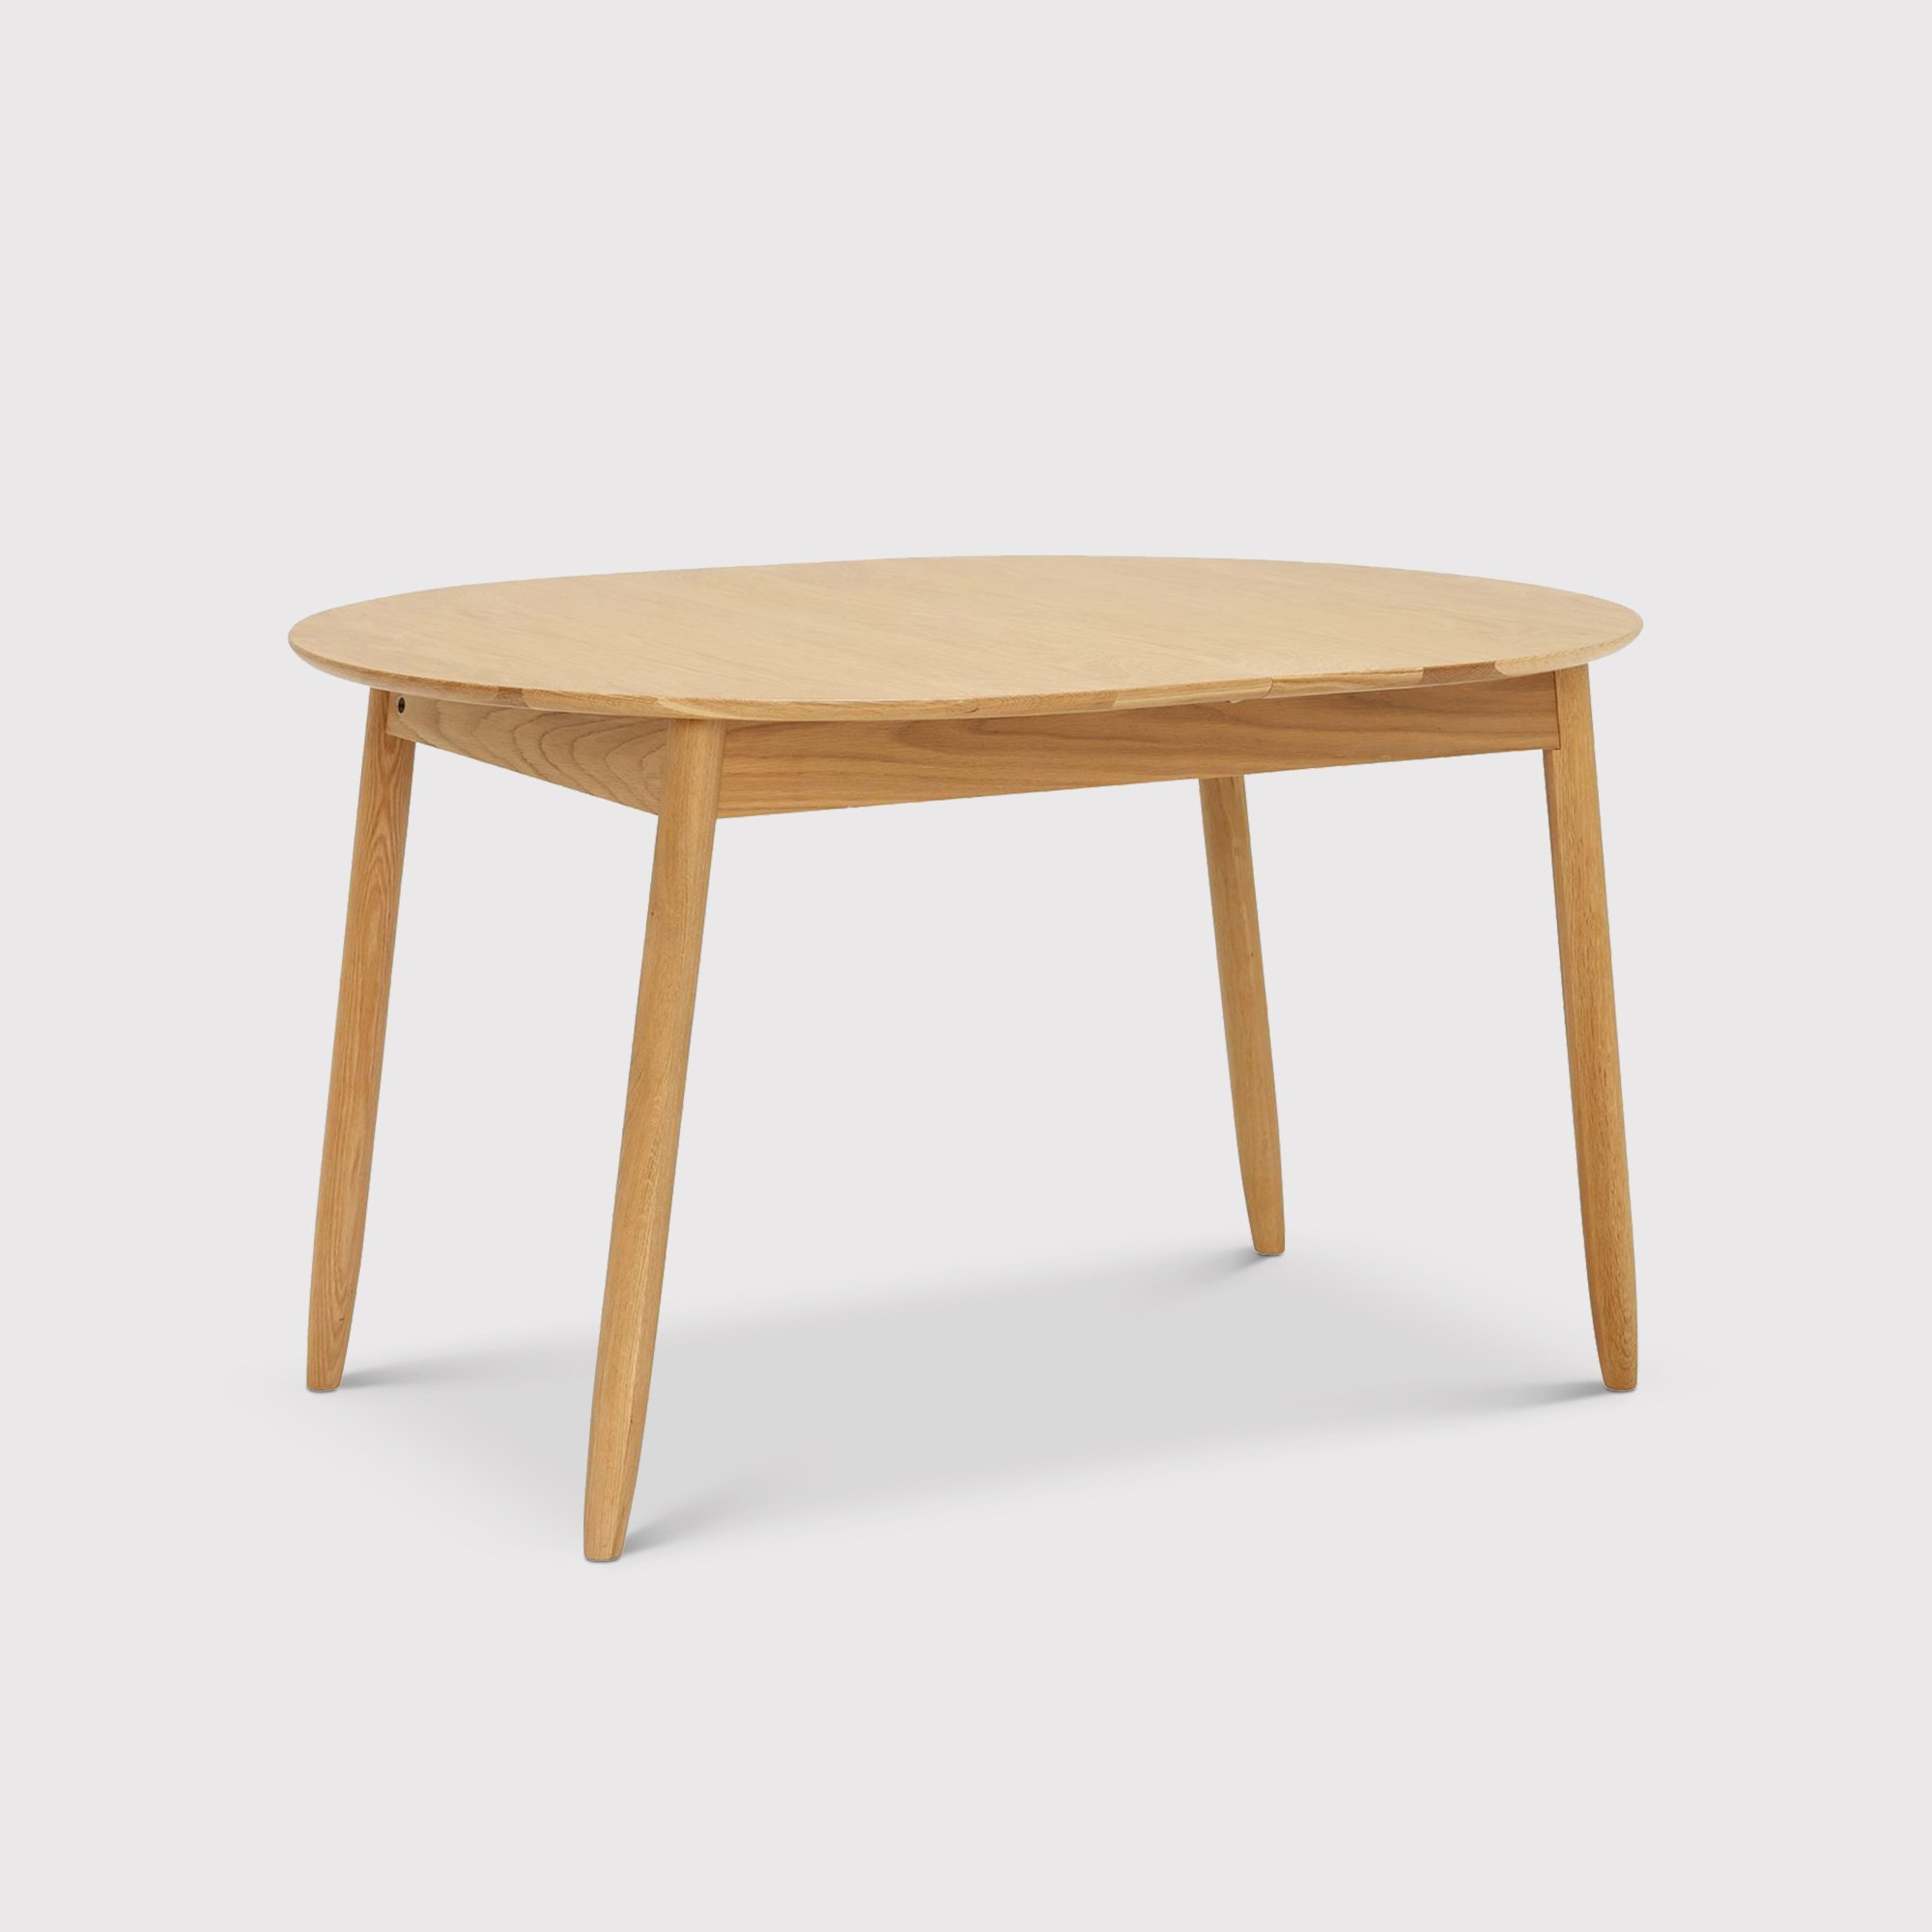 Ercol Teramo Small Extending Dining Table, Neutral | Barker & Stonehouse